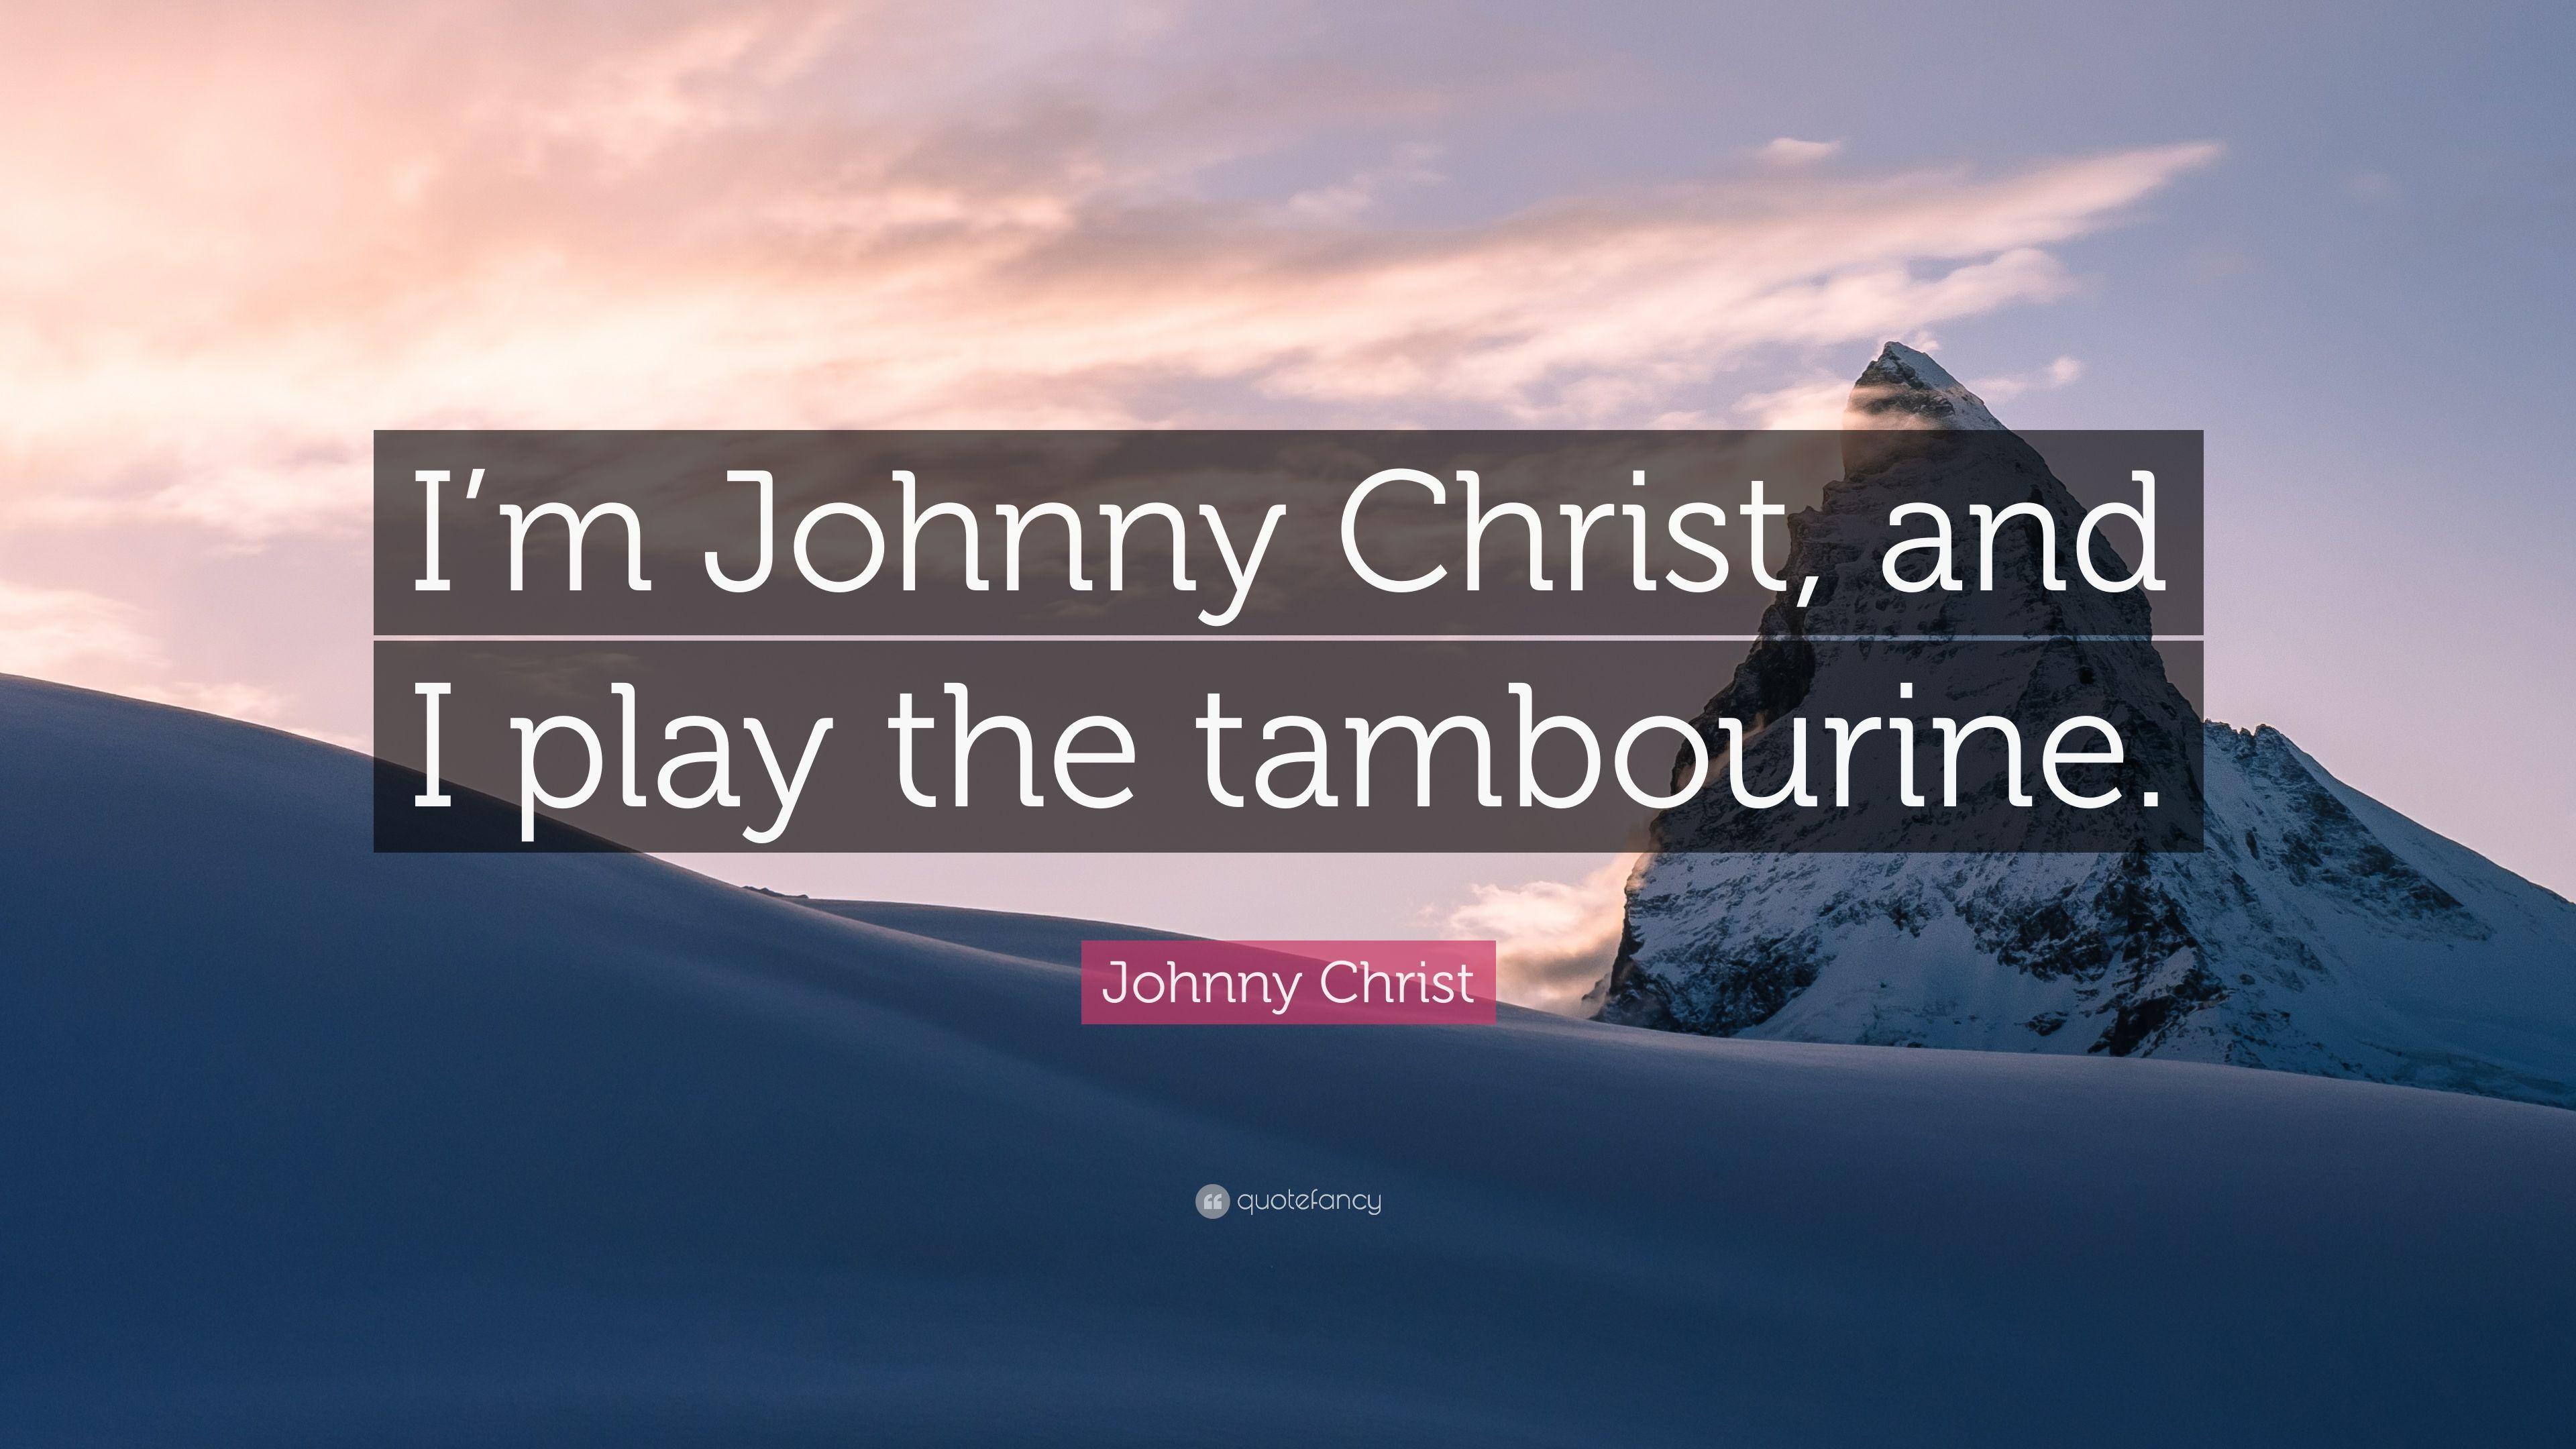 Johnny Christ Quote: “I'm Johnny Christ, and I play the tambourine